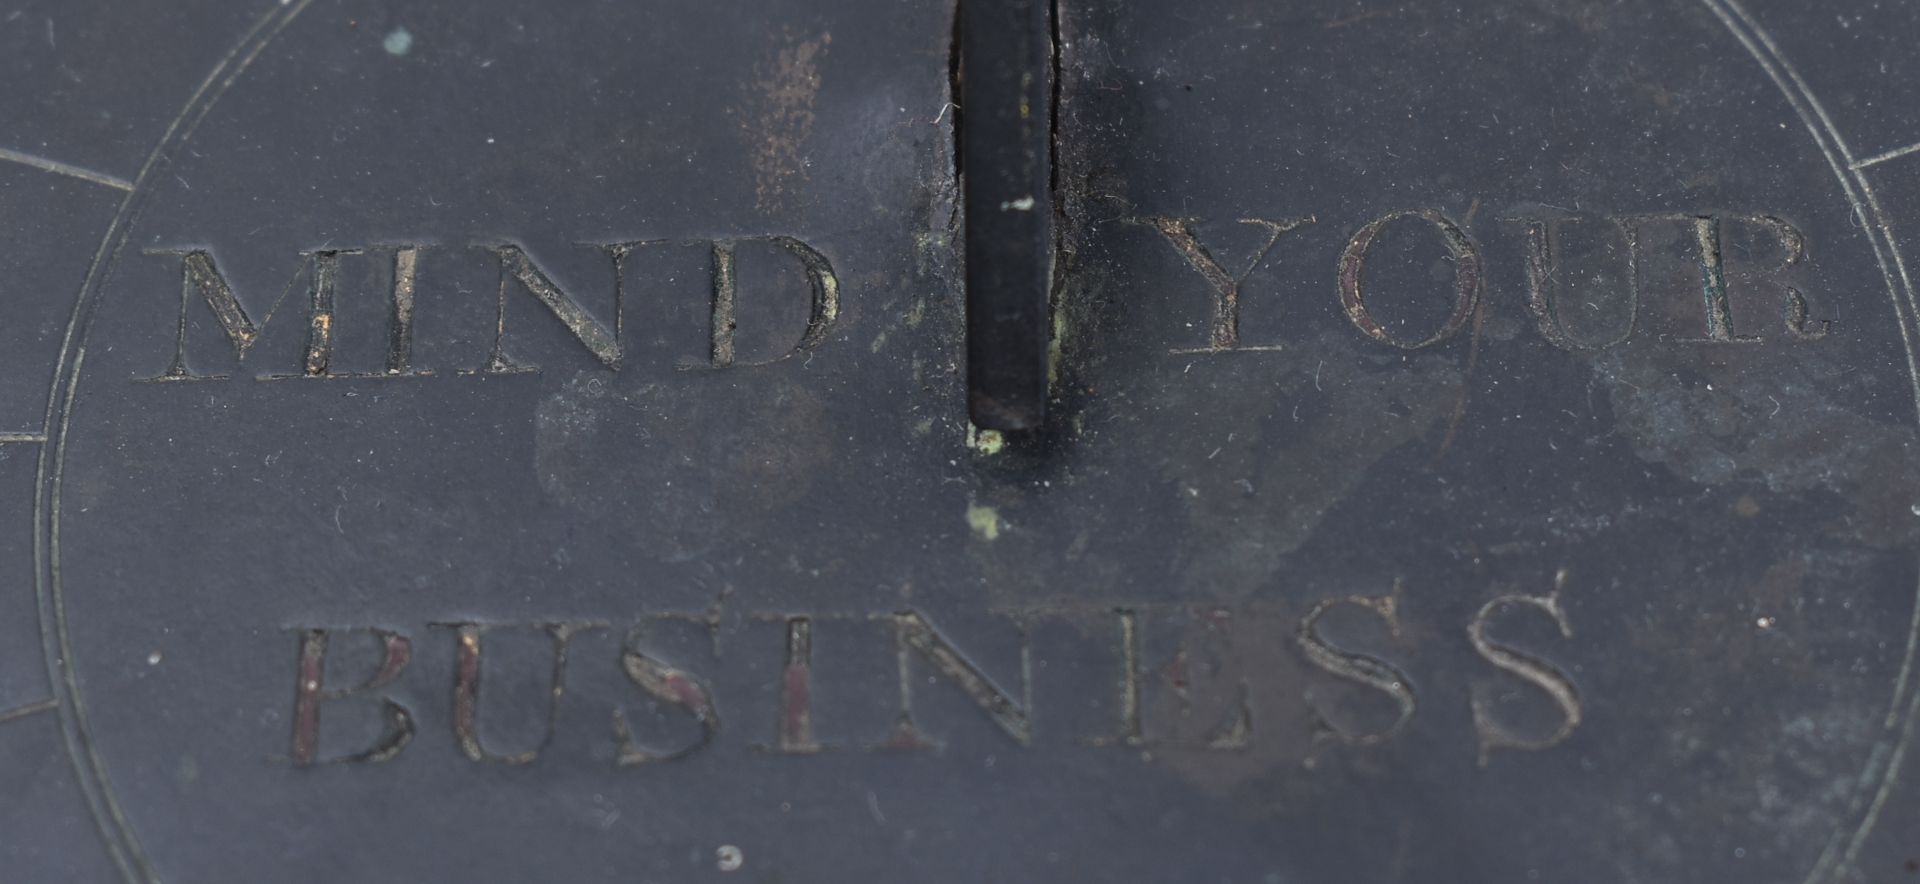 18TH CENTURY AMERICAN BRONZE SUNDIAL - " MIND YOUR BUSINESS " - Image 2 of 4